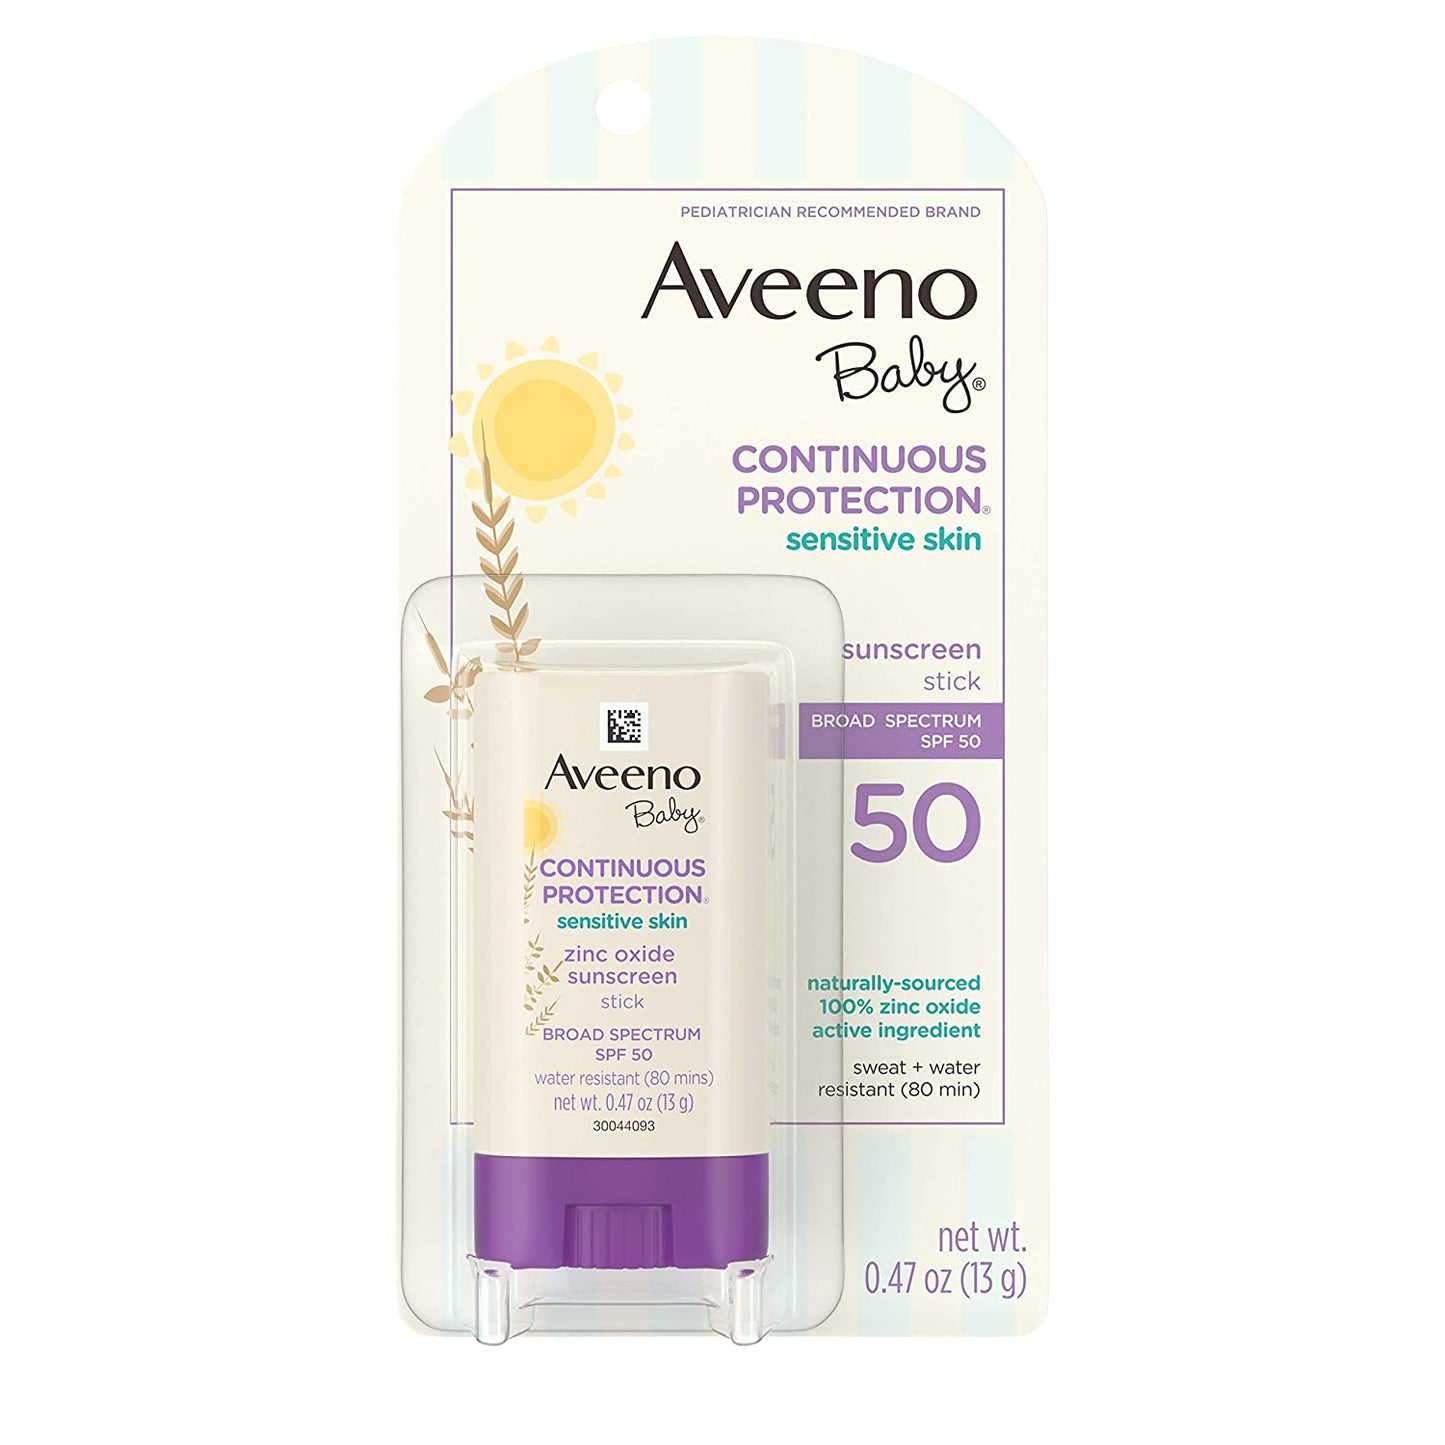 Aveeno Baby Continuous Protection Sensitive Skin Zinc Oxide Sunscreen Stick with Broad Spectrum SPF 50, 0.47 oz. / 13g